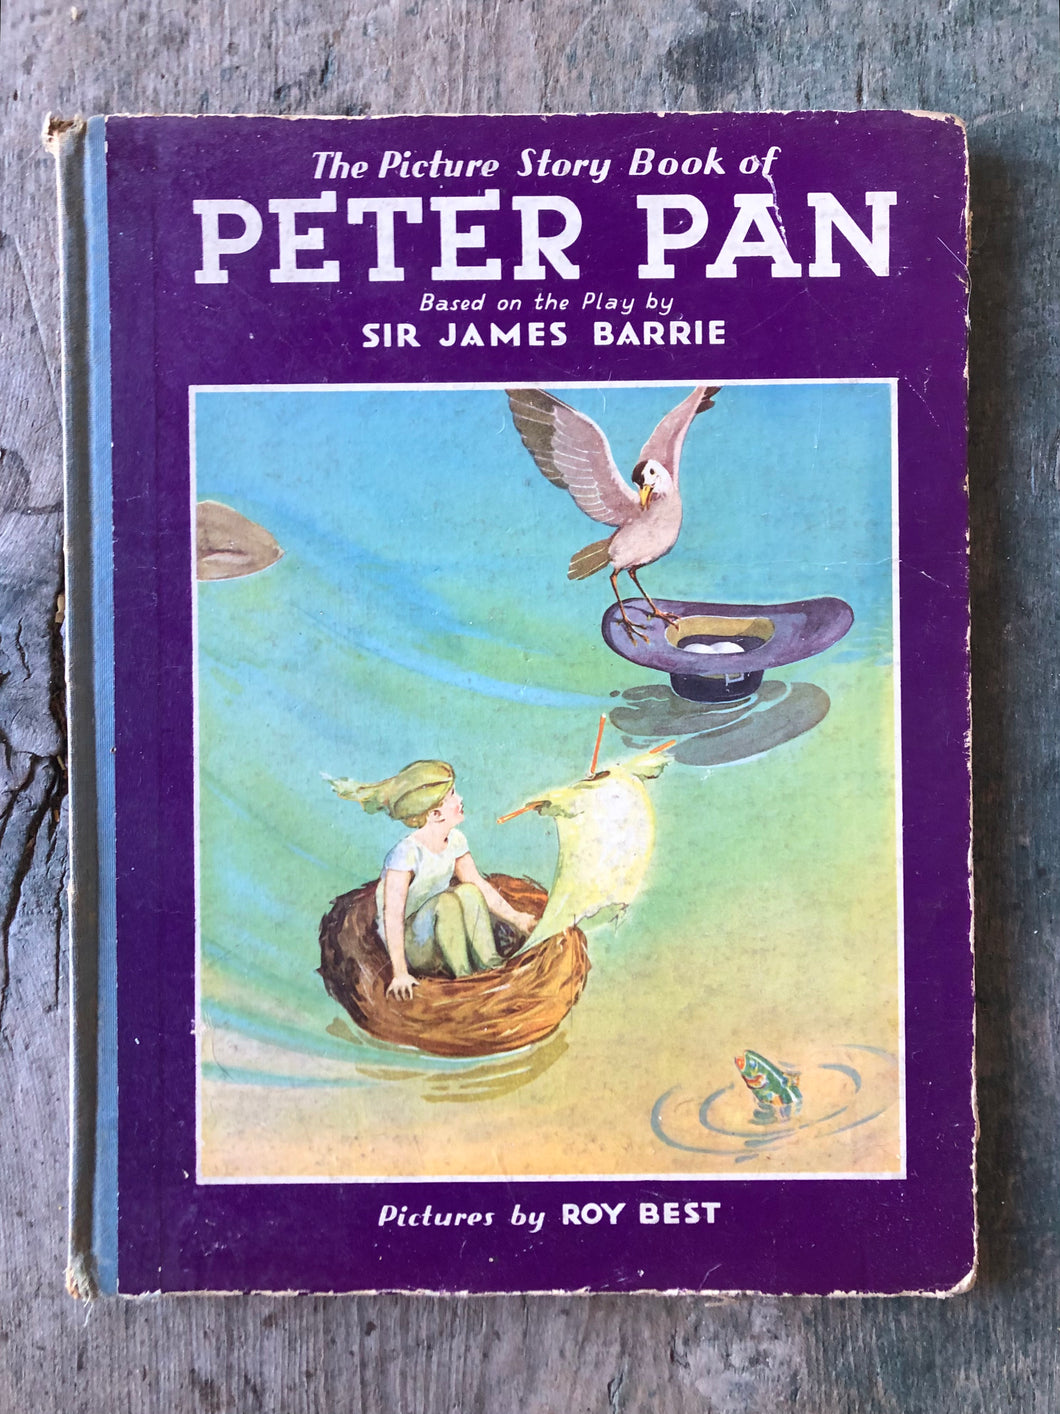 The Peter Pan Picture Book. Based on the Play by Sir James Barrie with illustrations by Roy Best